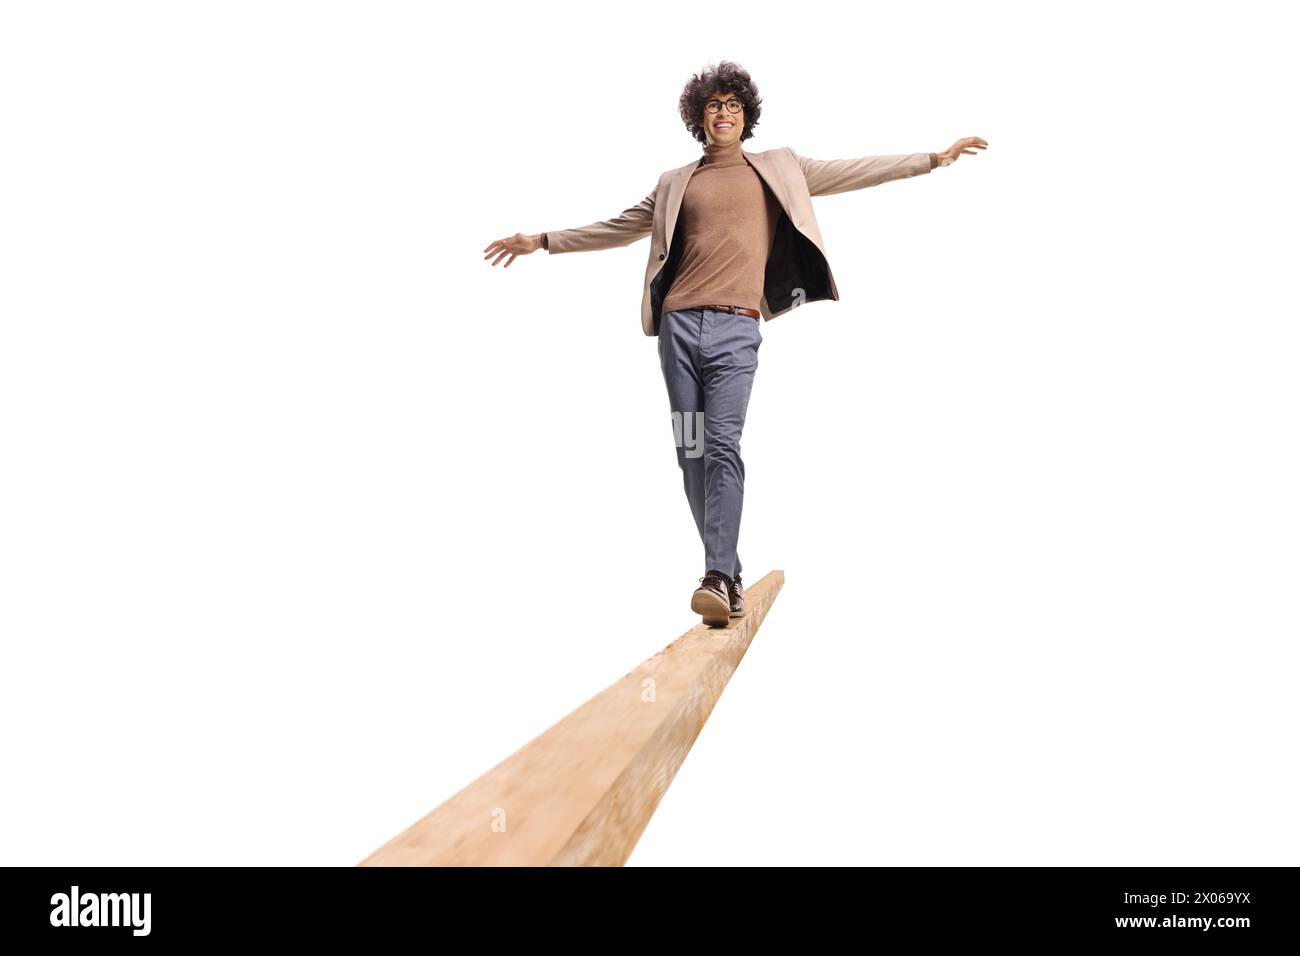 Young man with curly hair walking on a wooden beam and smiling isolated on white background Stock Photo